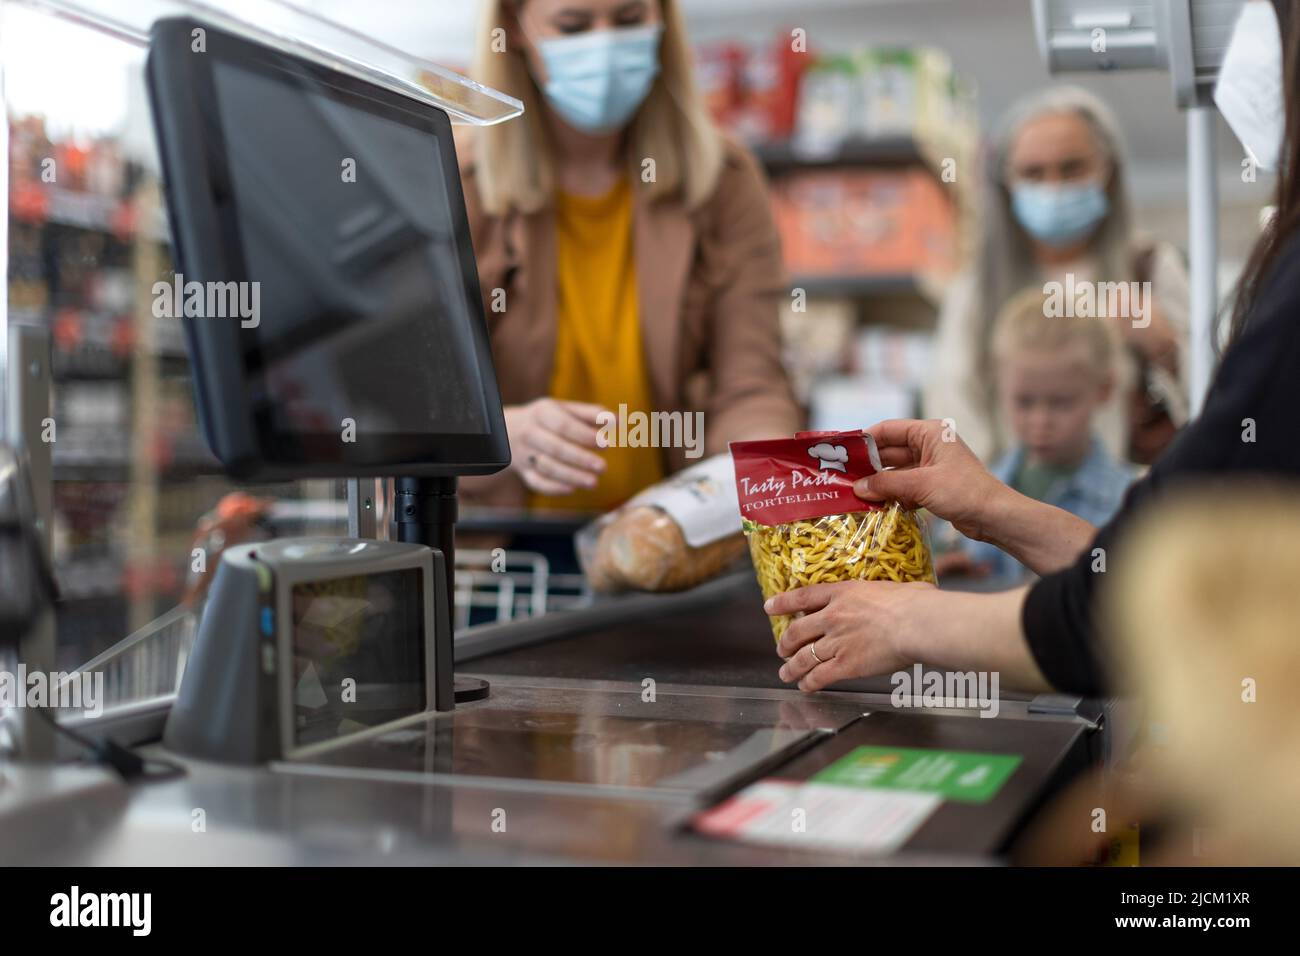 Checkout counter hands of the cashier scans groceries in supermarket. Stock Photo